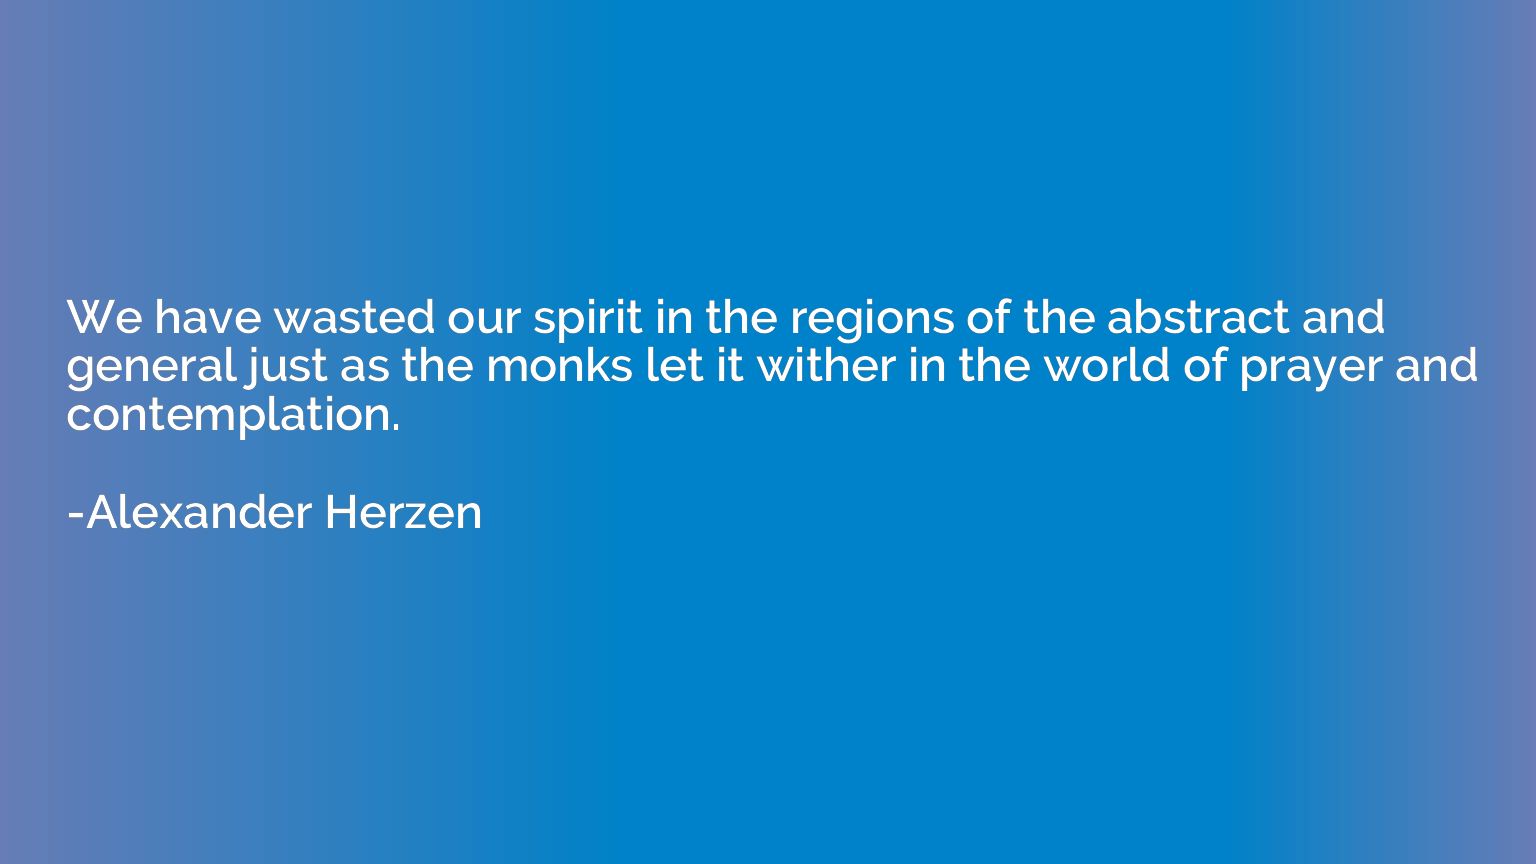 We have wasted our spirit in the regions of the abstract and